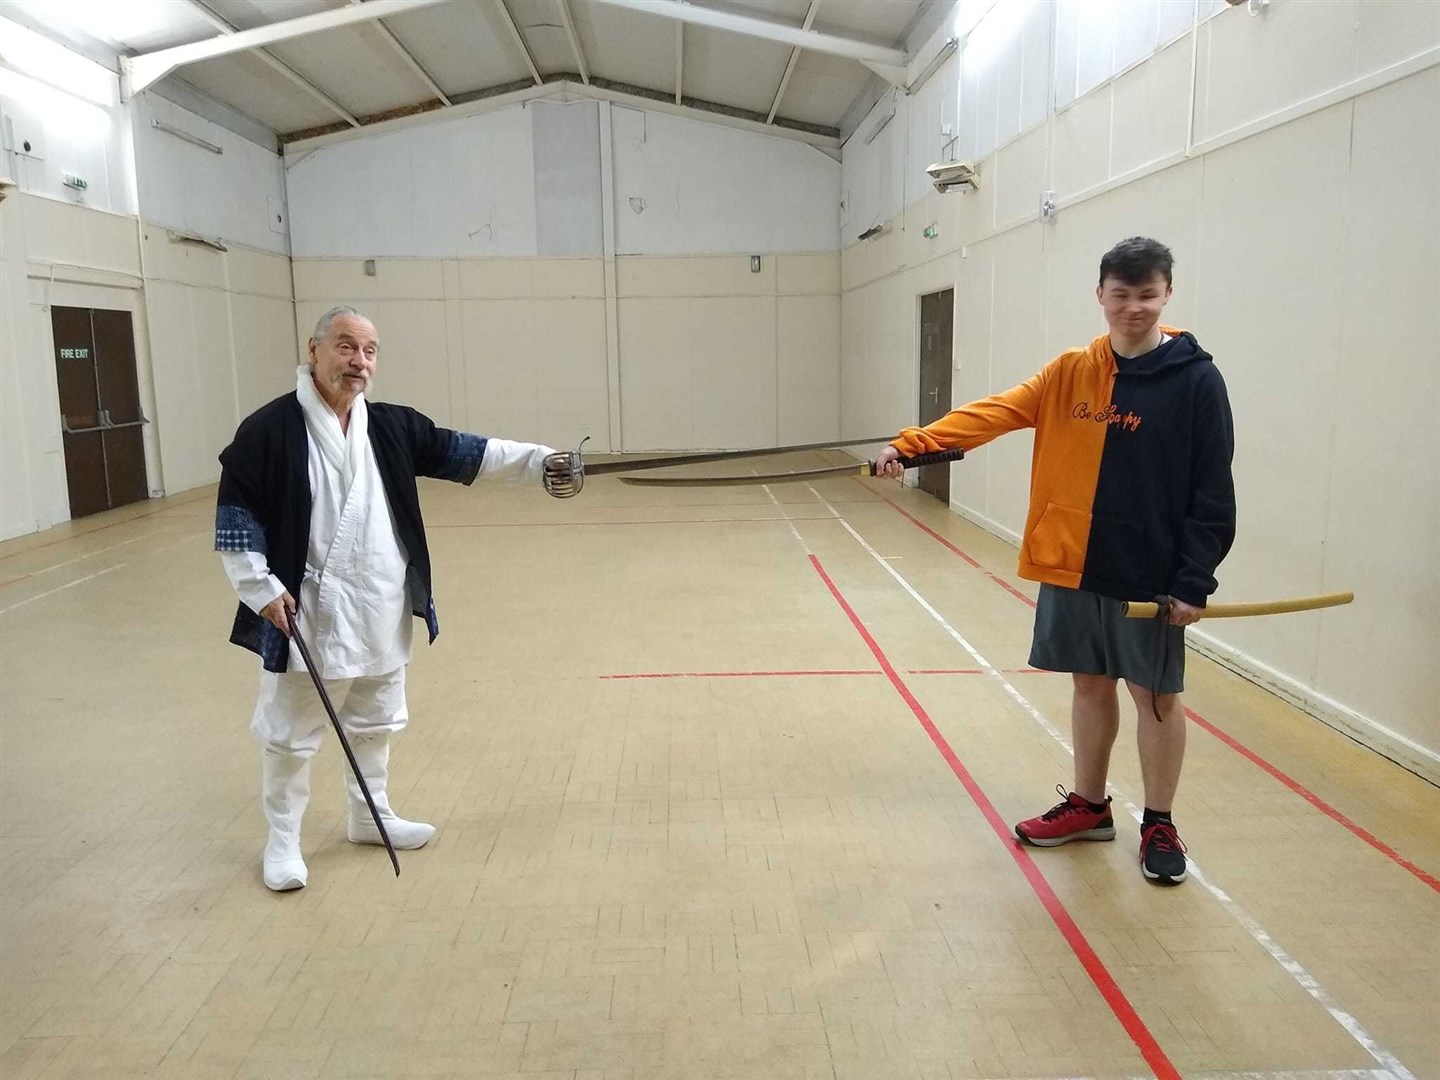 Mick Skelly, left, and one of the participants on the one-day historical fencing course which was held on Dingwall. Photo: Ali Cameron